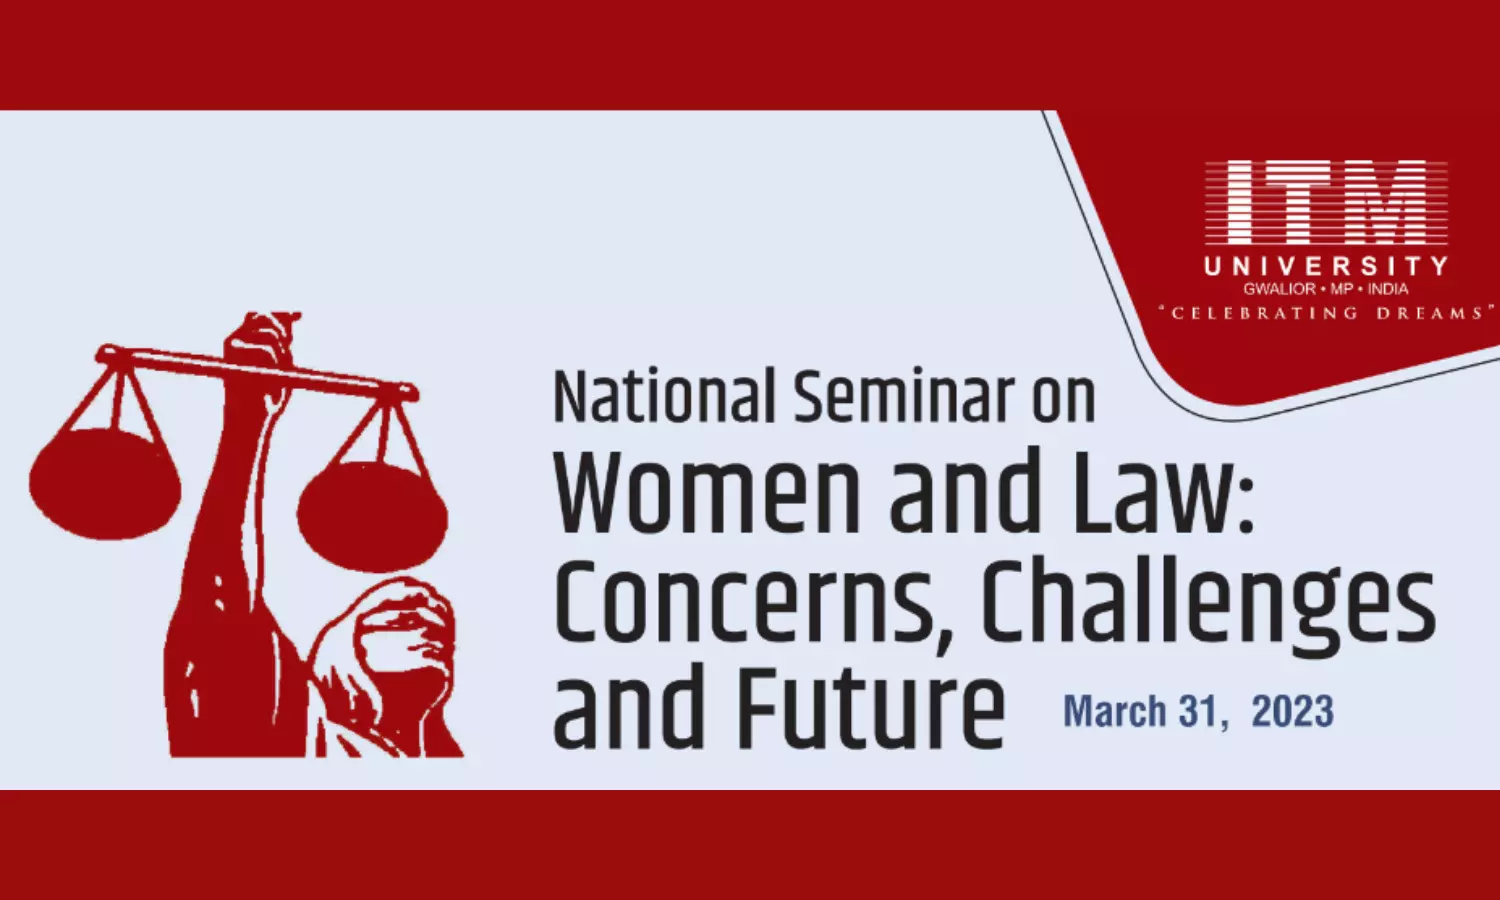 National Seminar on Women and Law 2023: Concerns, Challenges and Future | ITM University Gwalior | 31 March